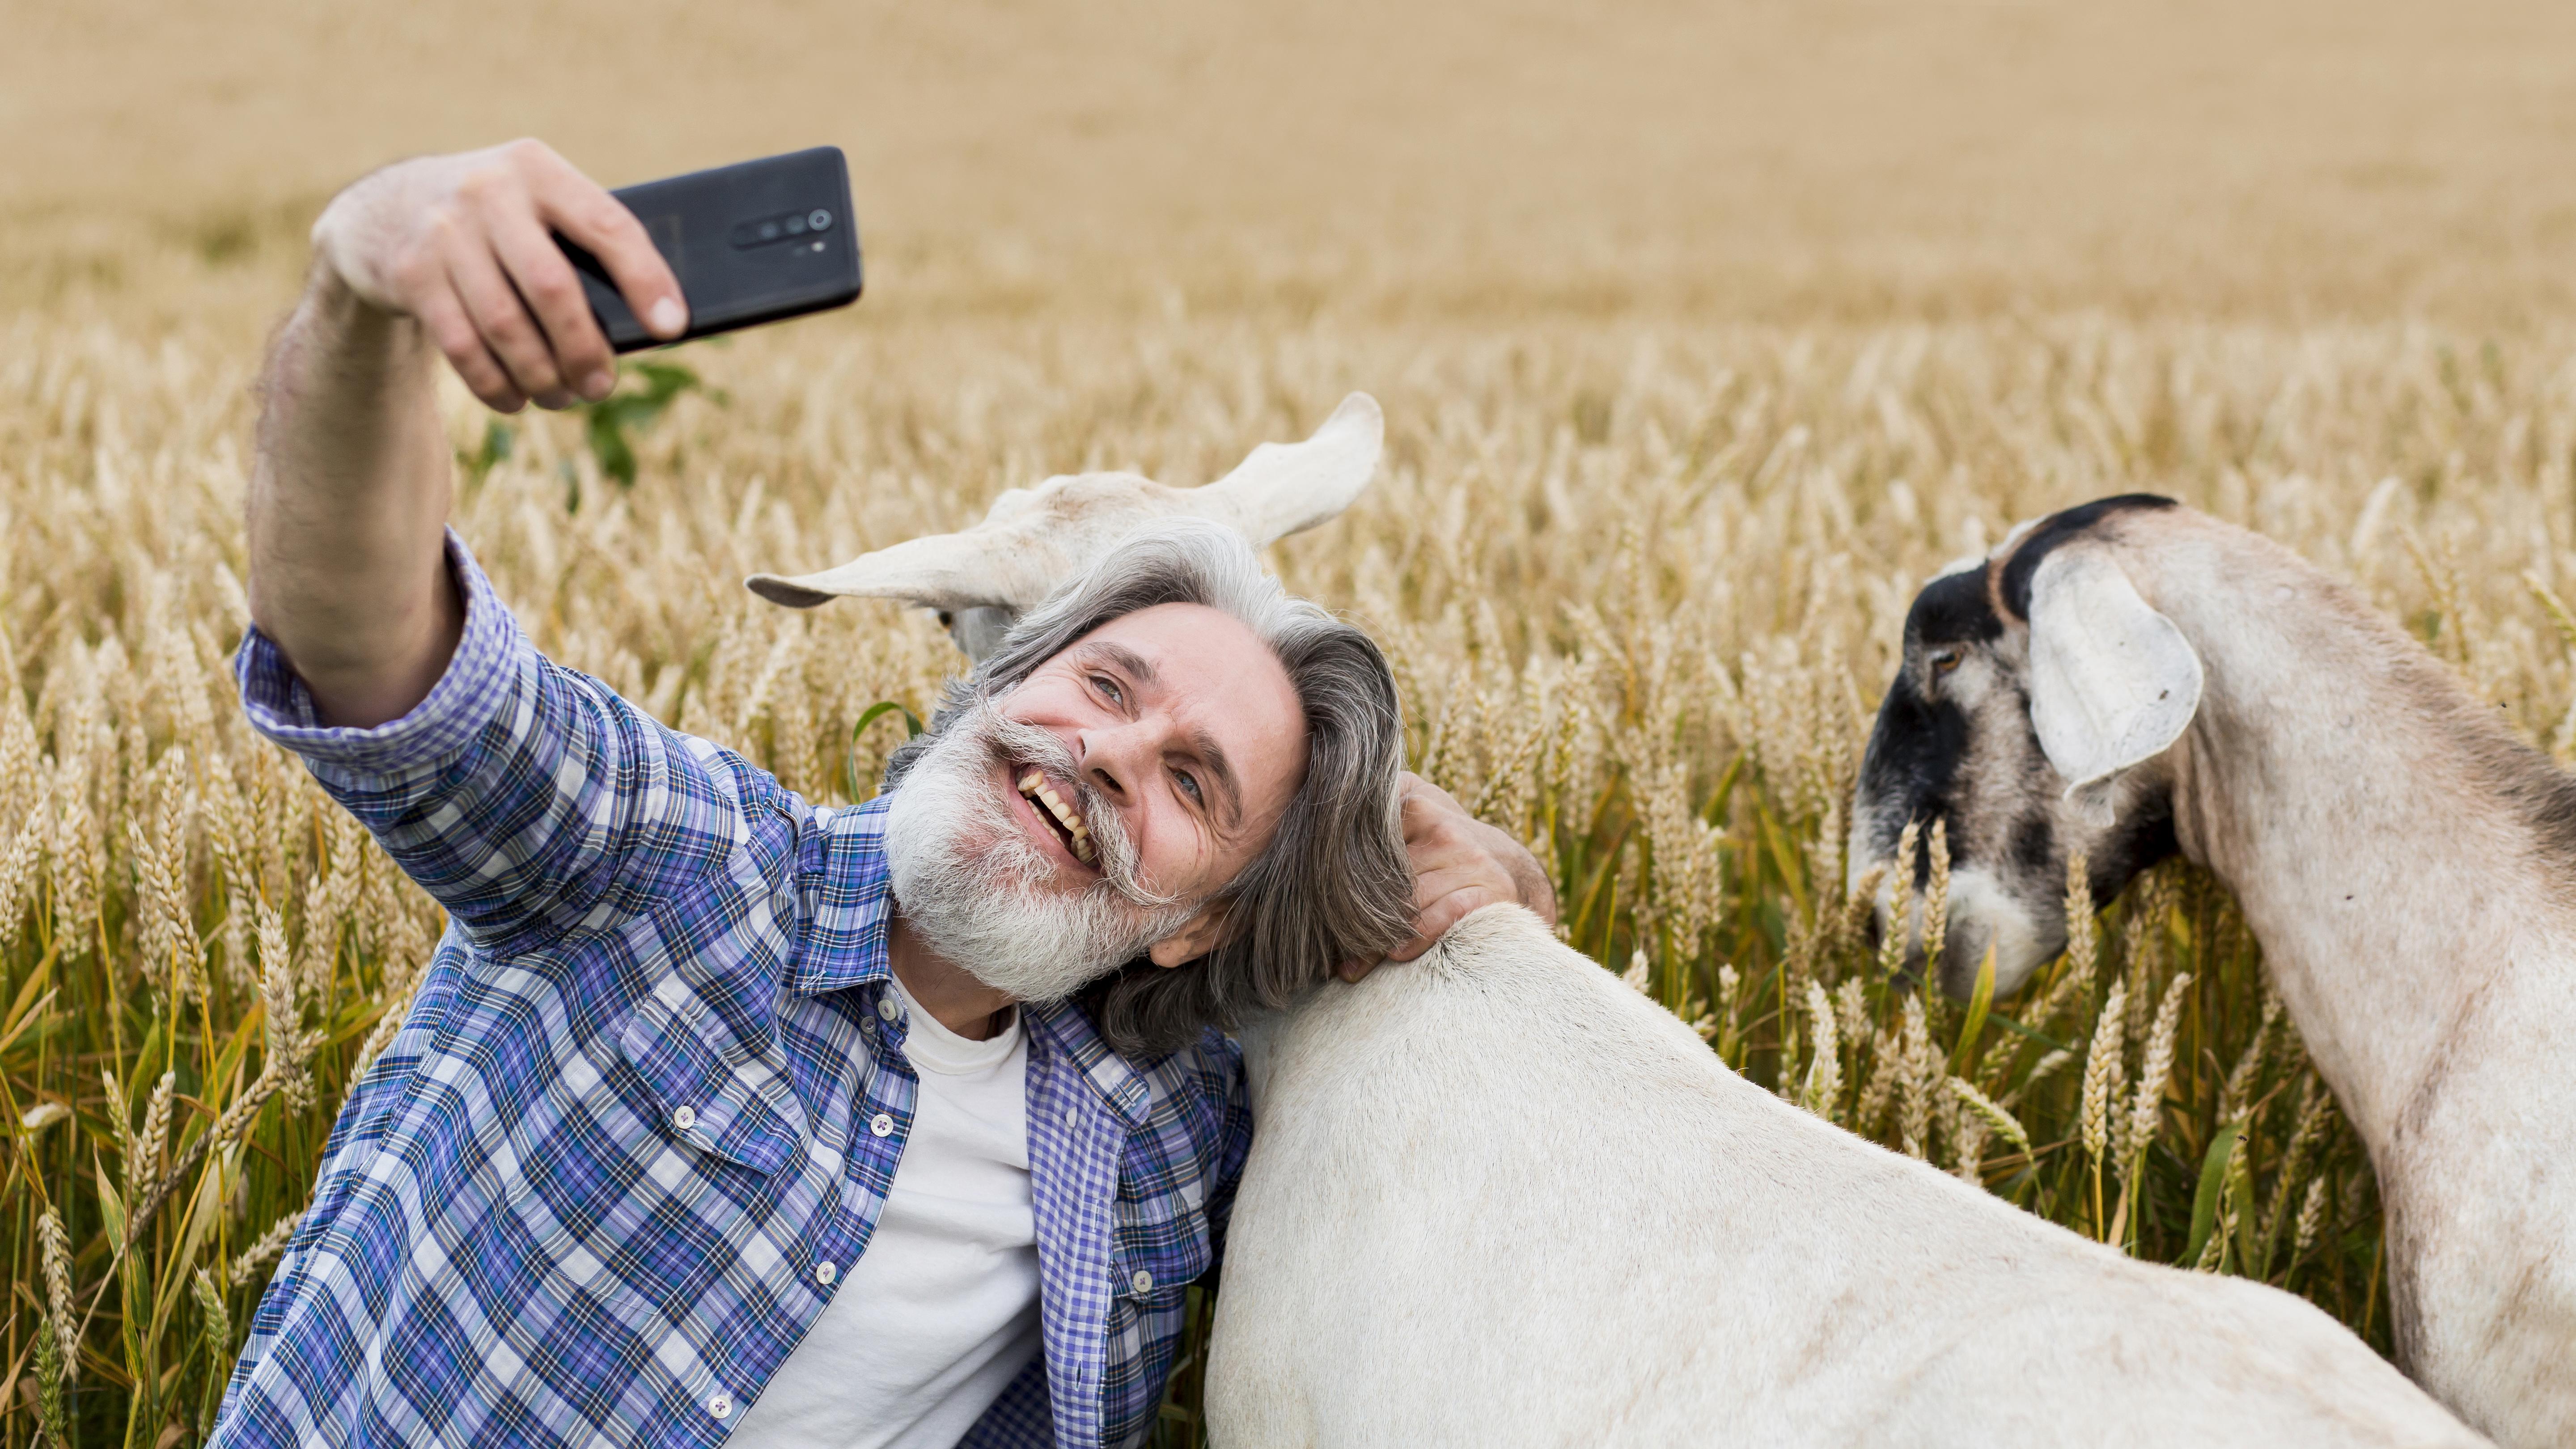 More Mobile Phones Than Sheep in New Zealand.